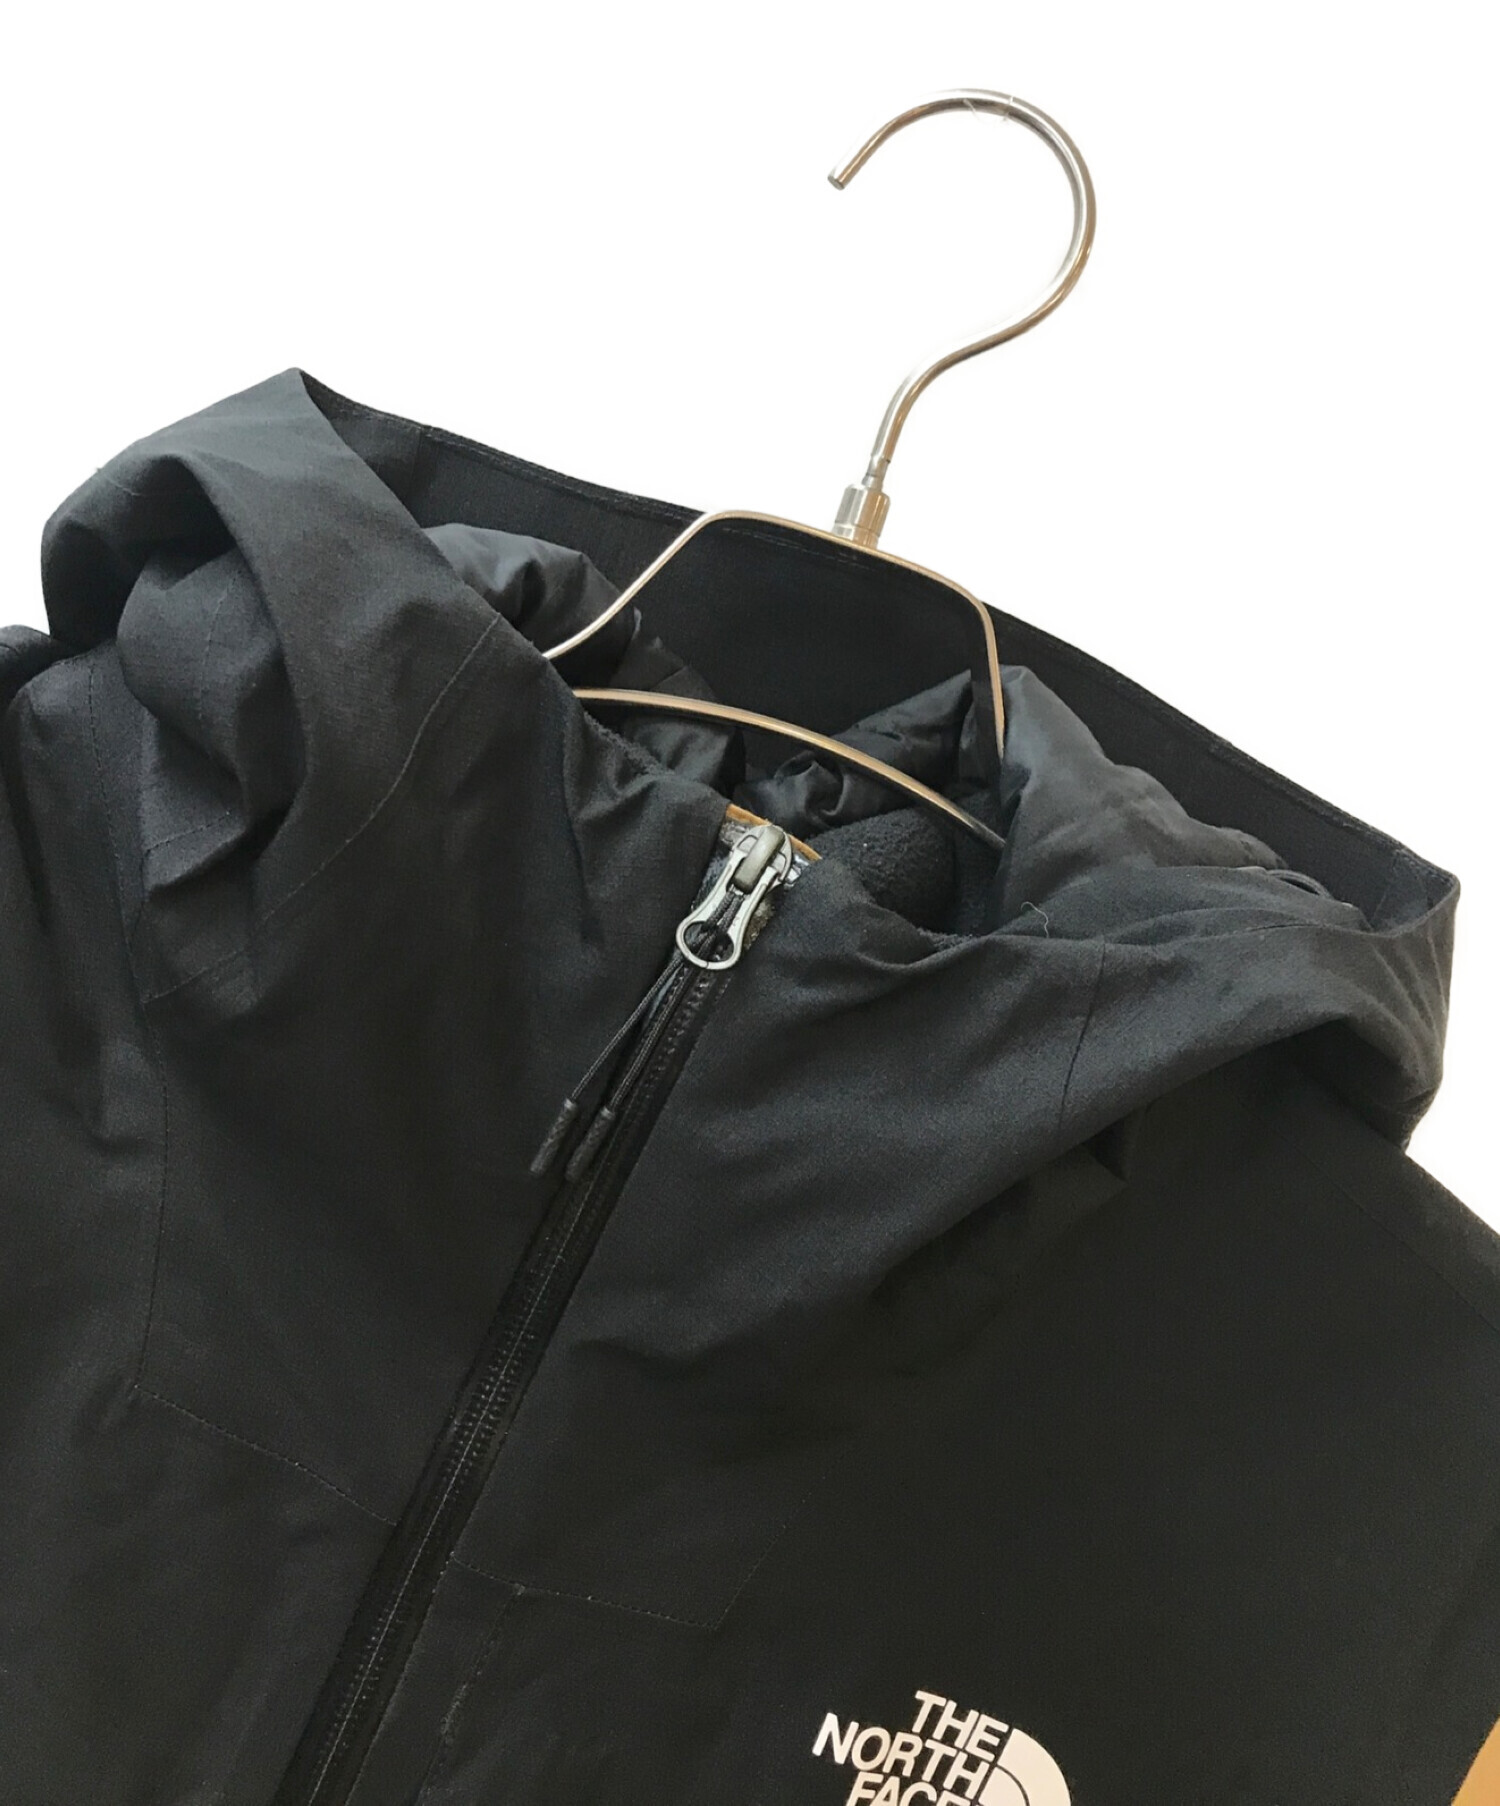 THE NORTH FACE INLUX INSULATED JACKET